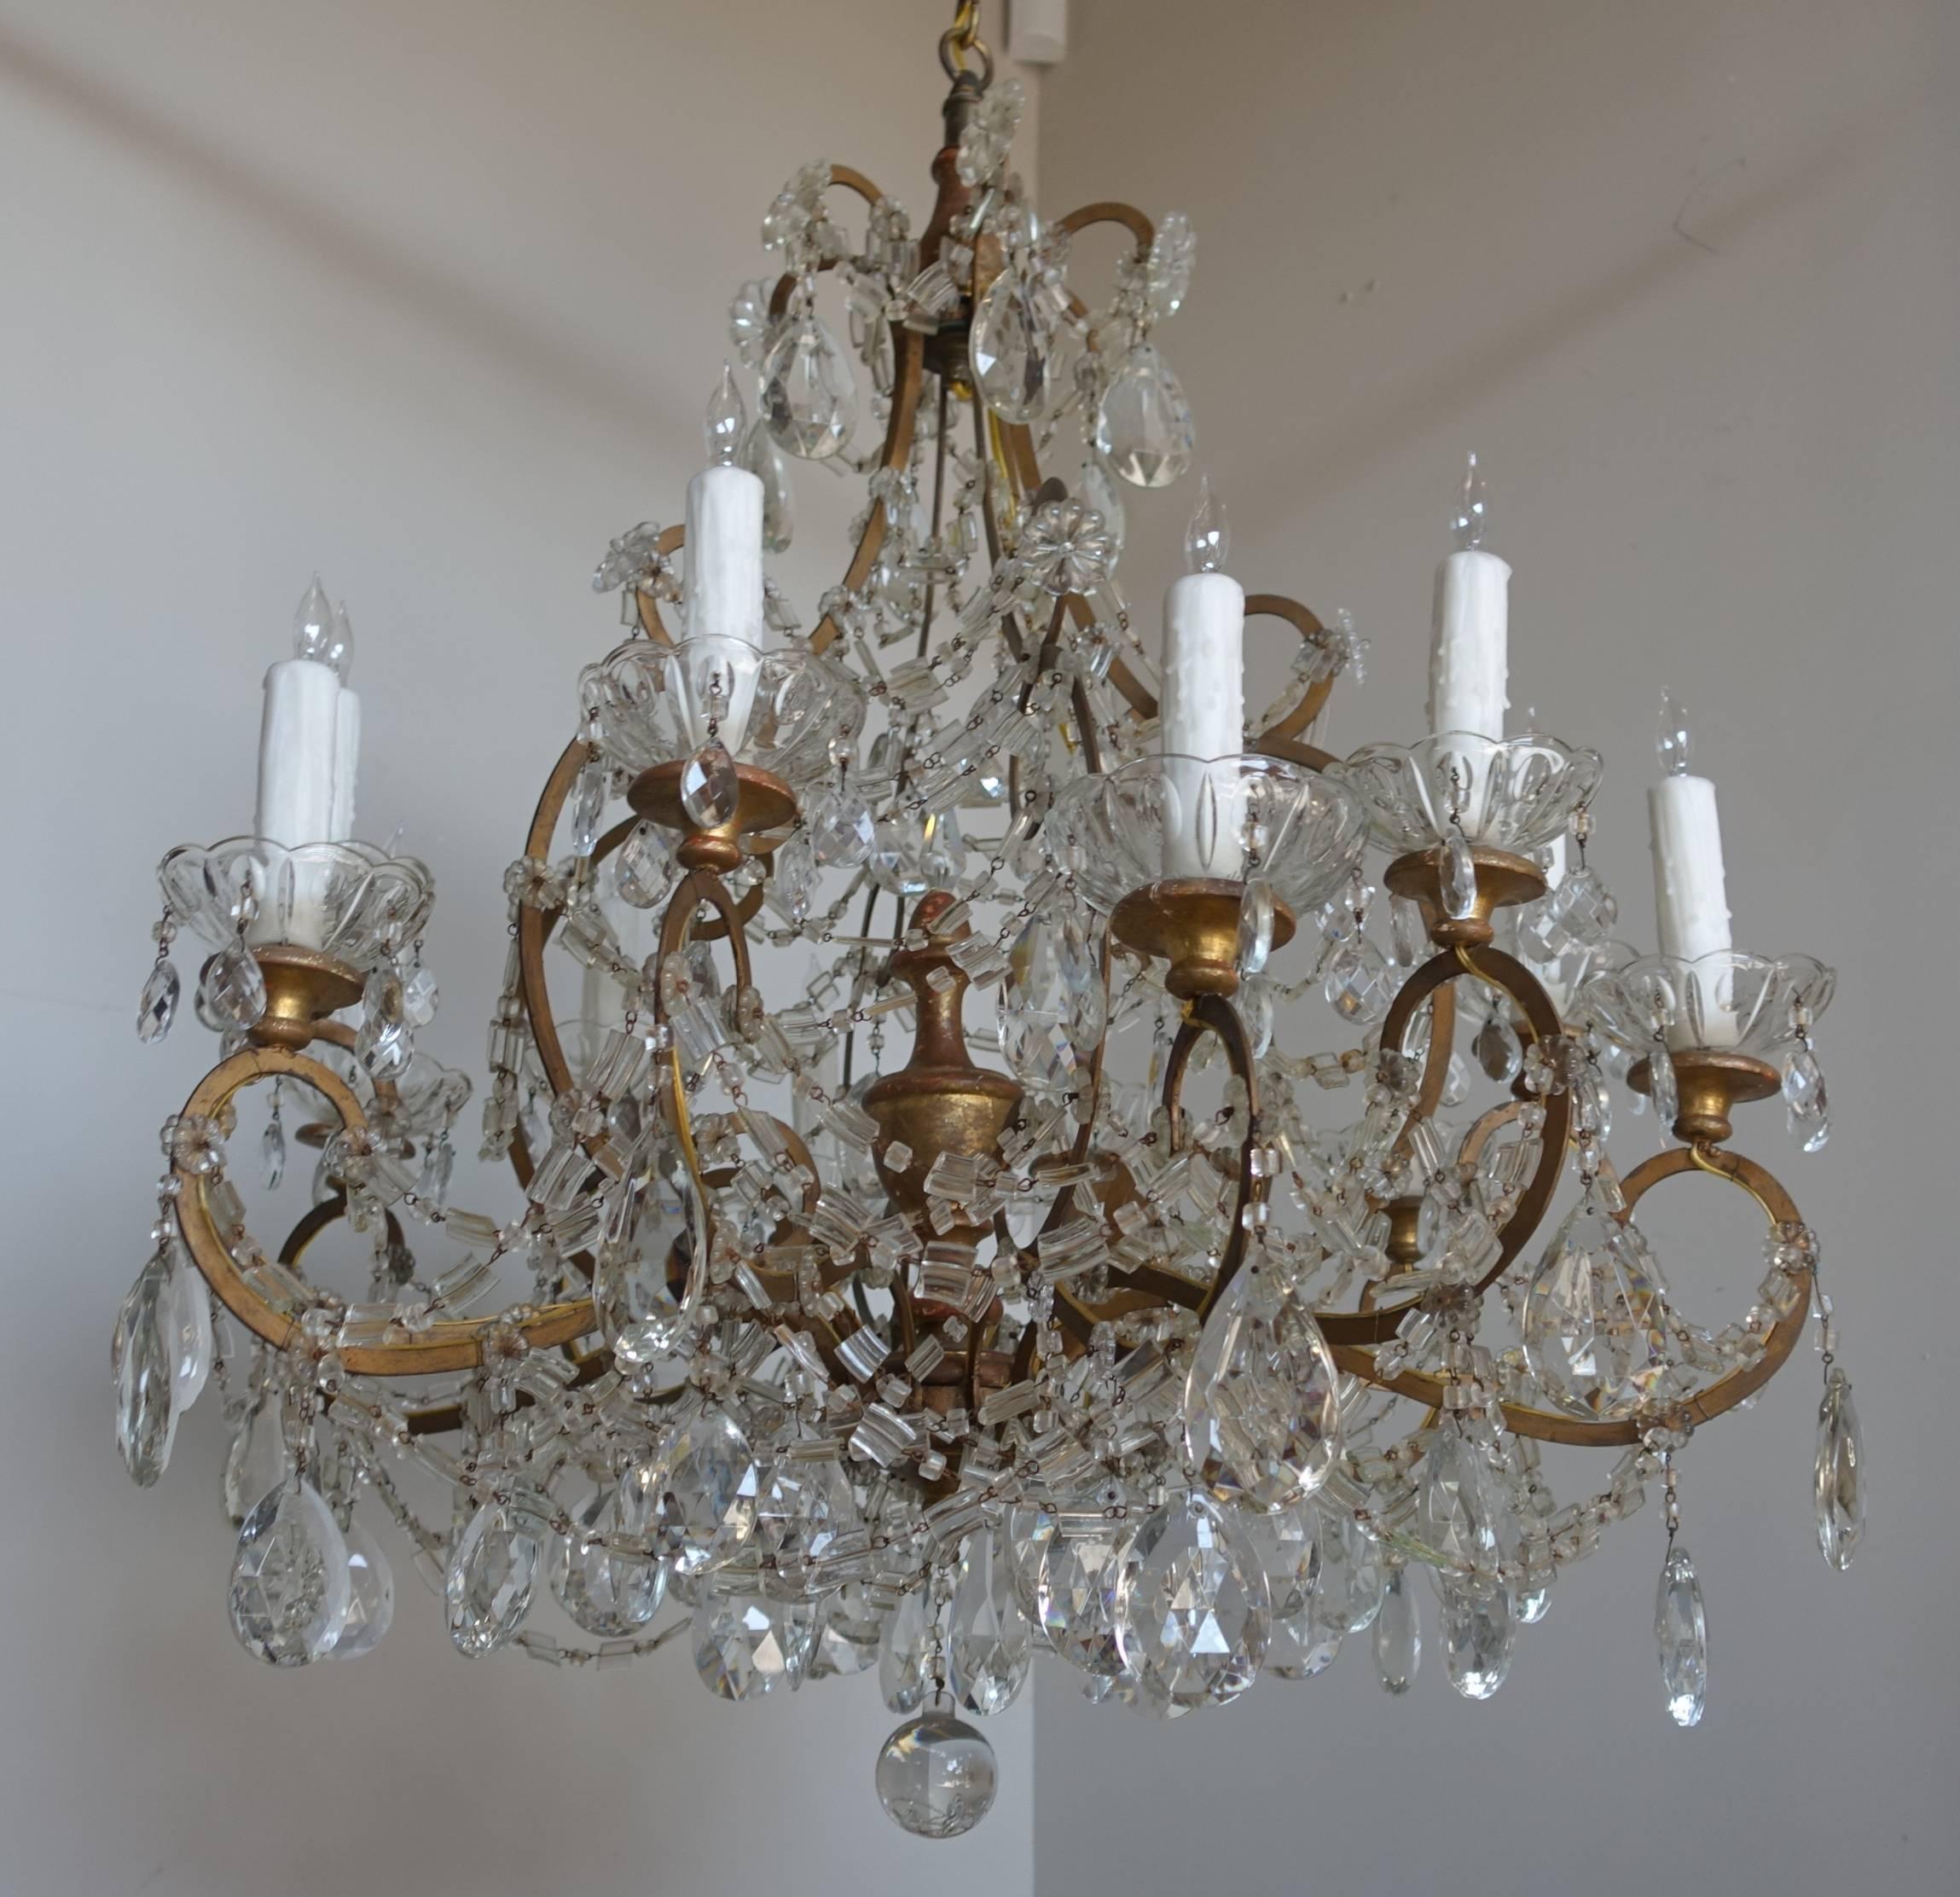 Twelve-light Italian gilt metal crystal chandelier with unique crystal garlands, crystal rosettes, and tear drop crystals throughout. Giltwood center finial and bobeches with crystal underneath. Rewired with new sockets and drip wax candle covers.